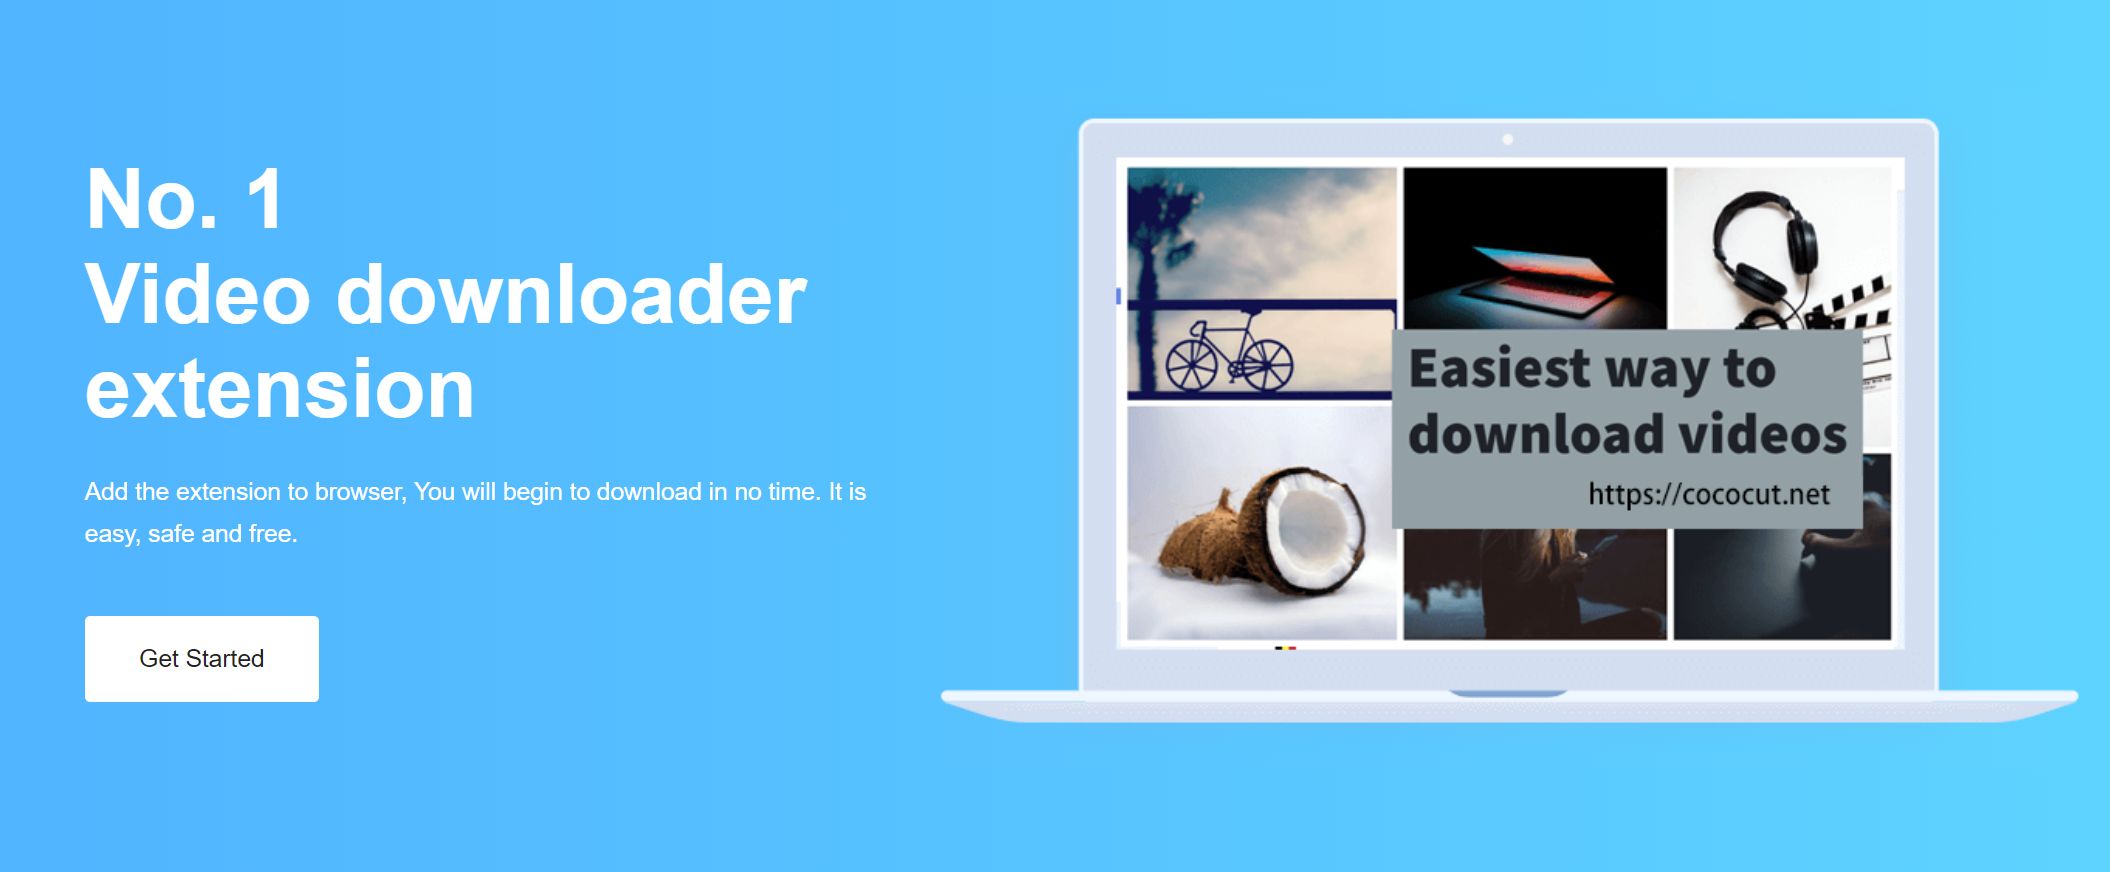 Cococut Video Downloader Review: Enjoy the Benefits of this Video Downloader